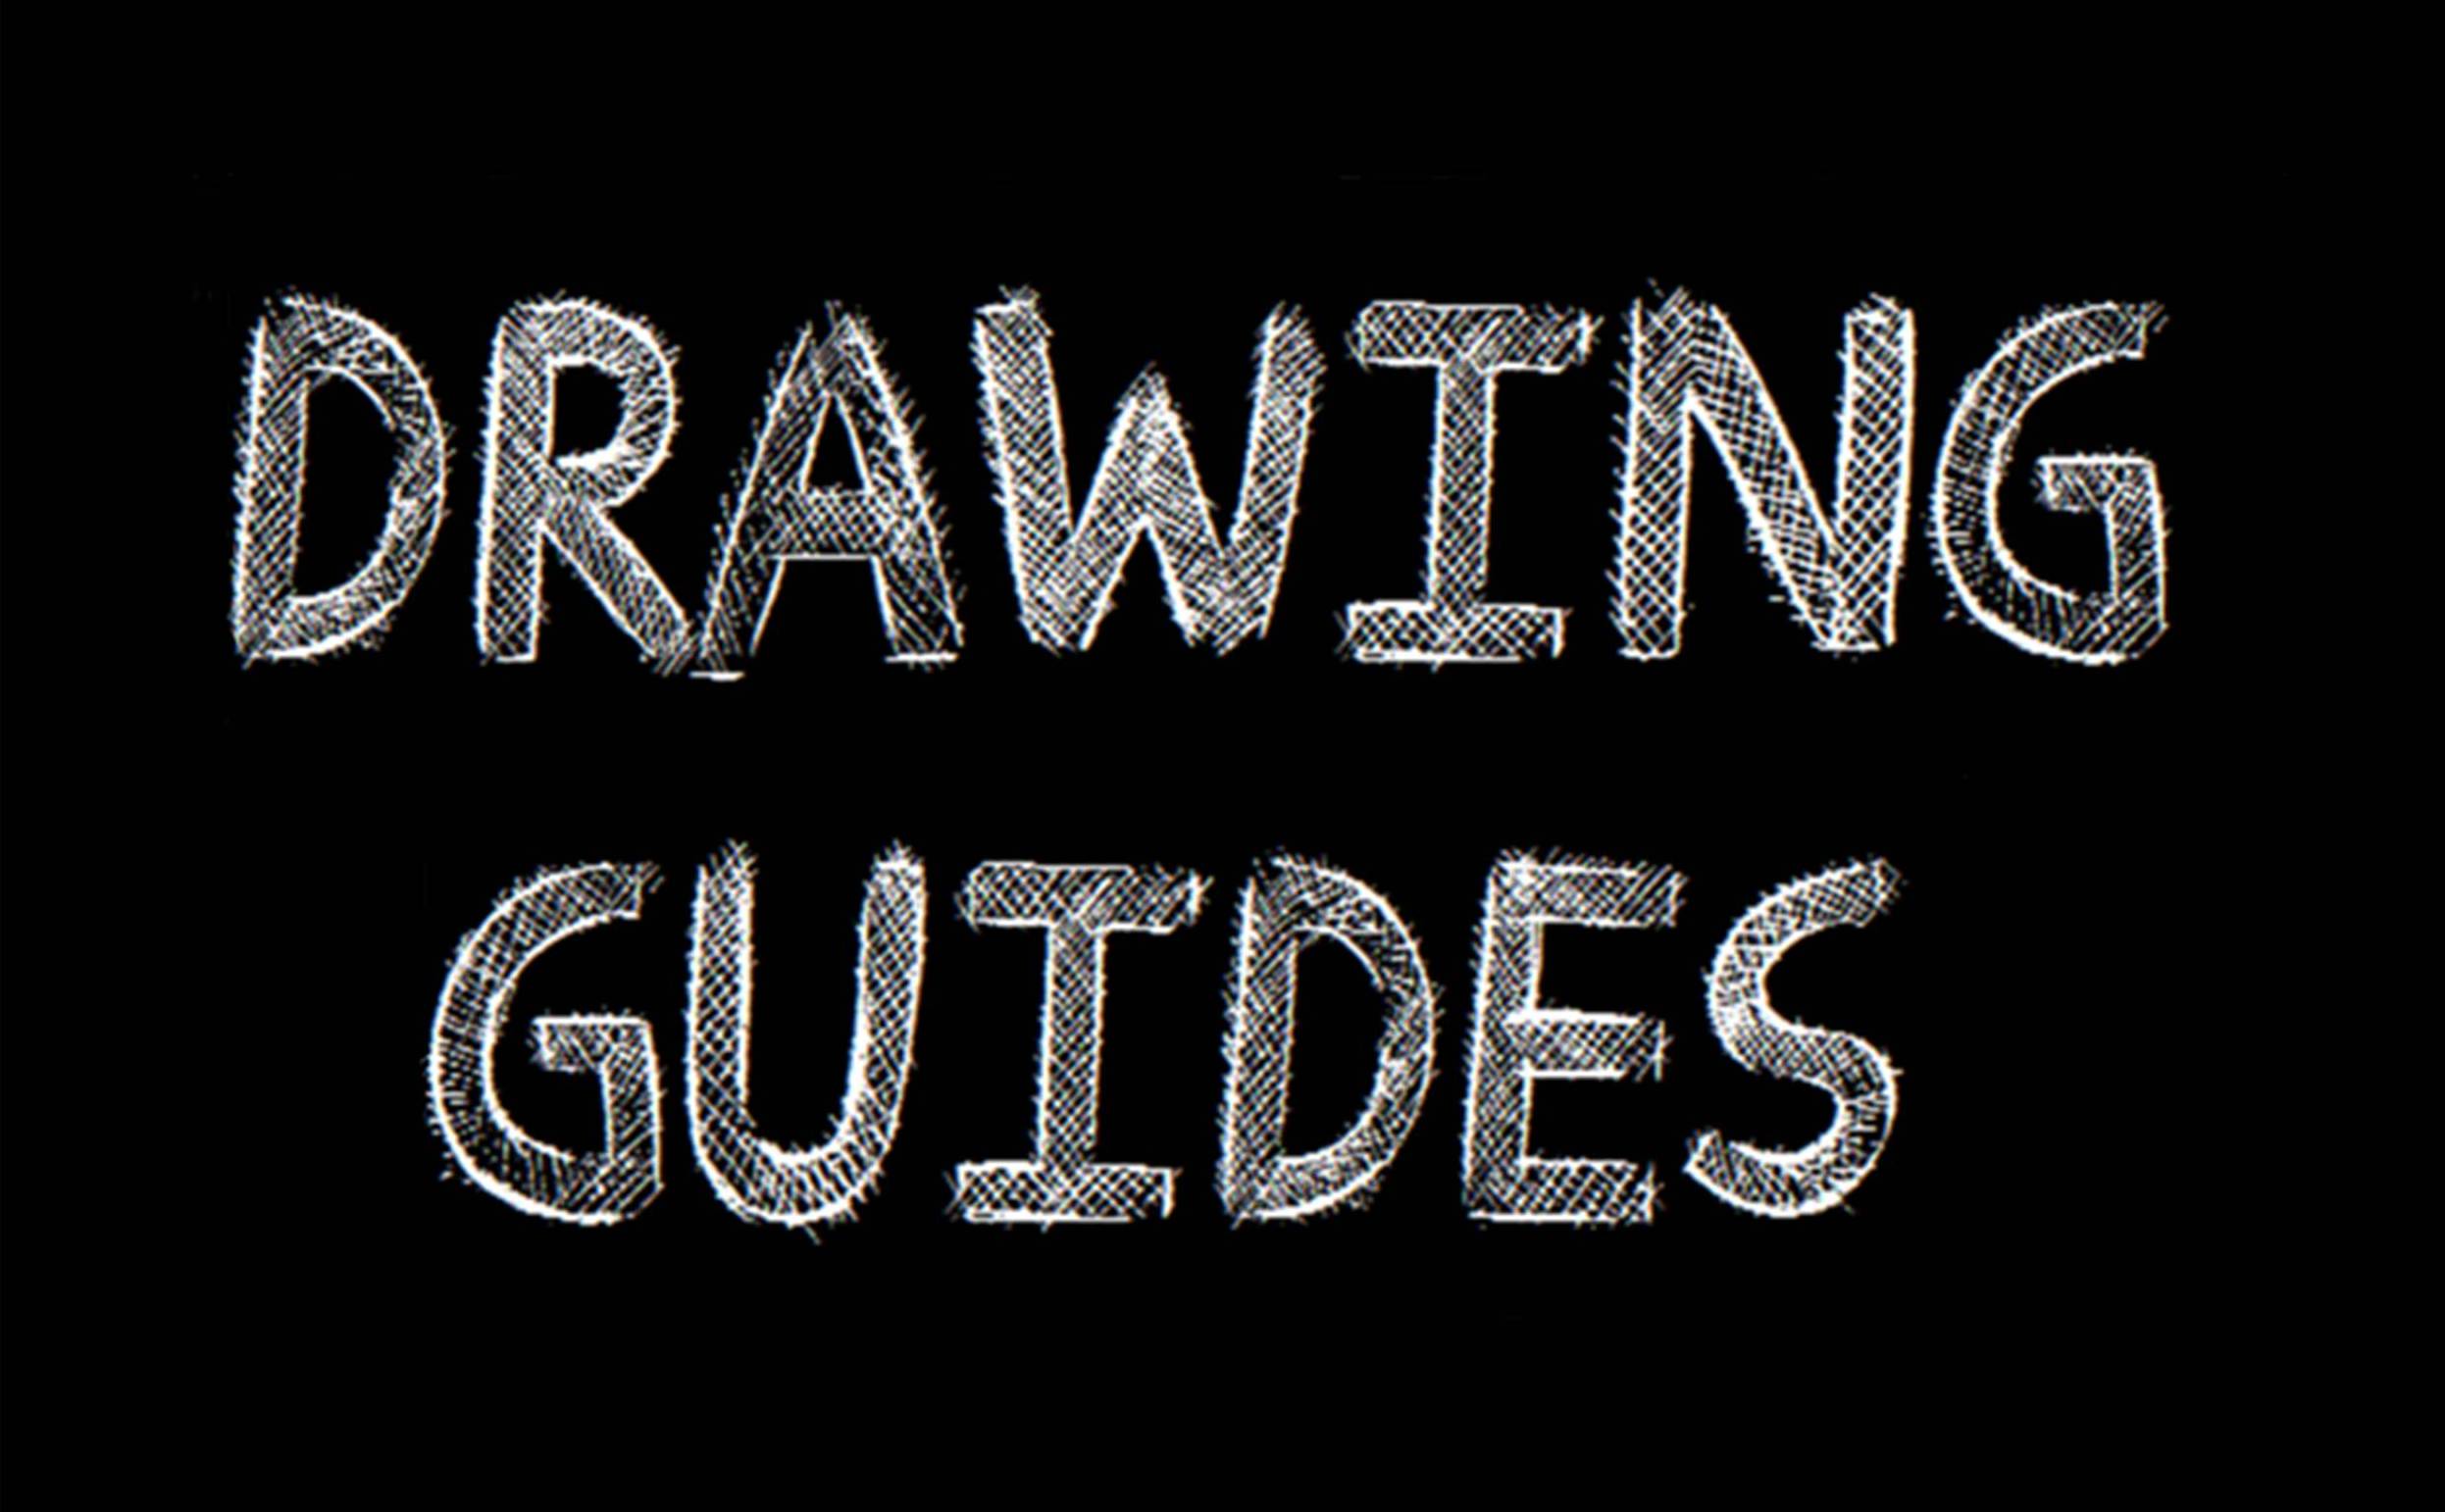 Drawing Guides